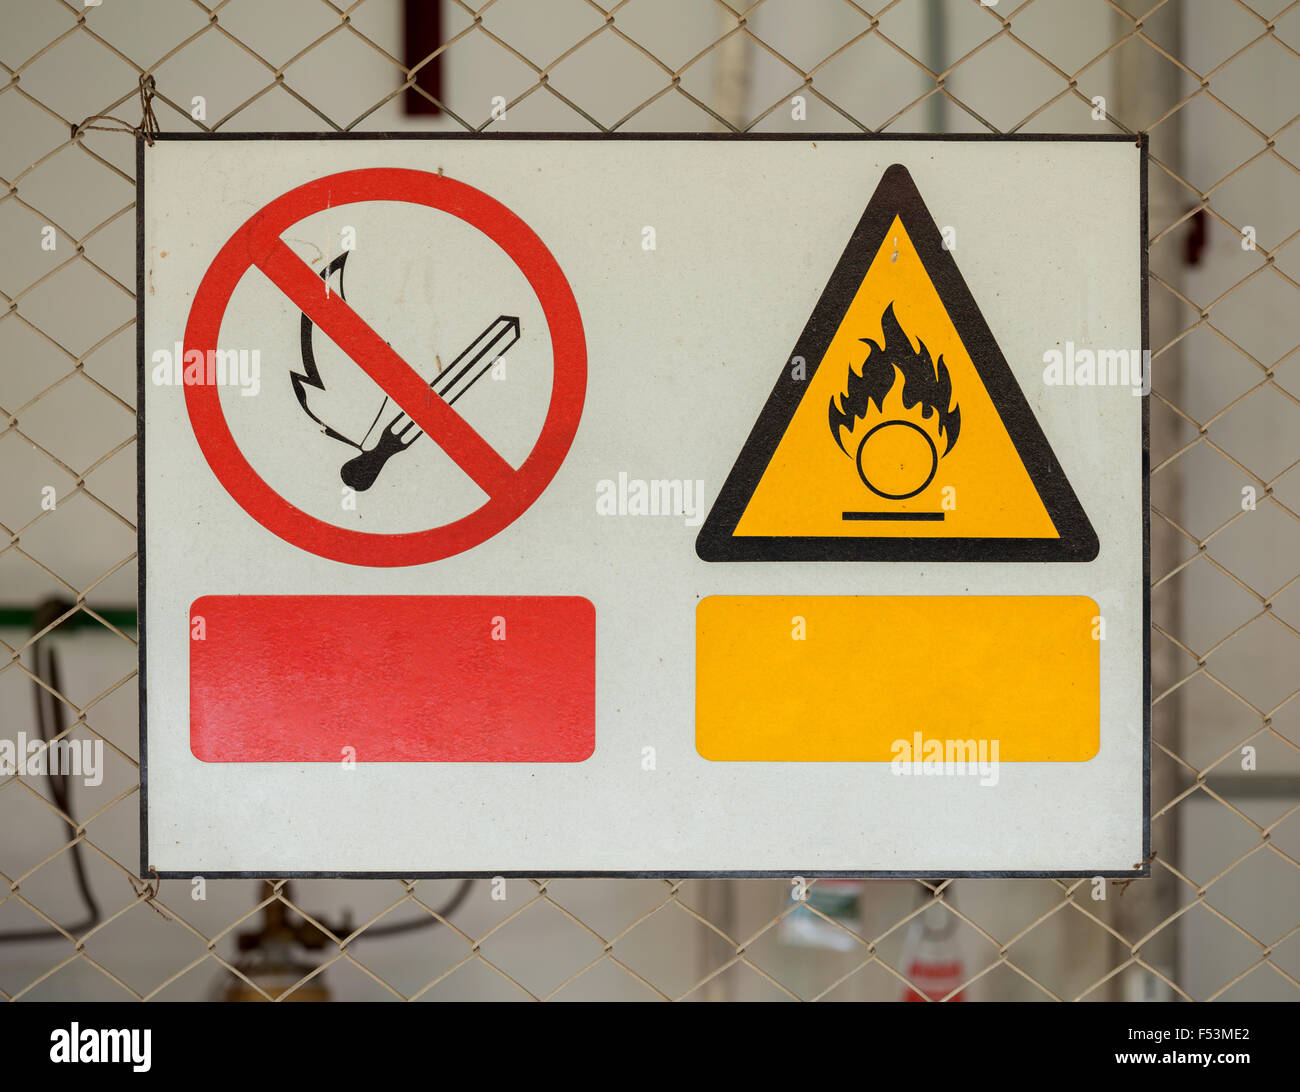 No fire sign and Fire warning signs near dangerous objects Stock Photo